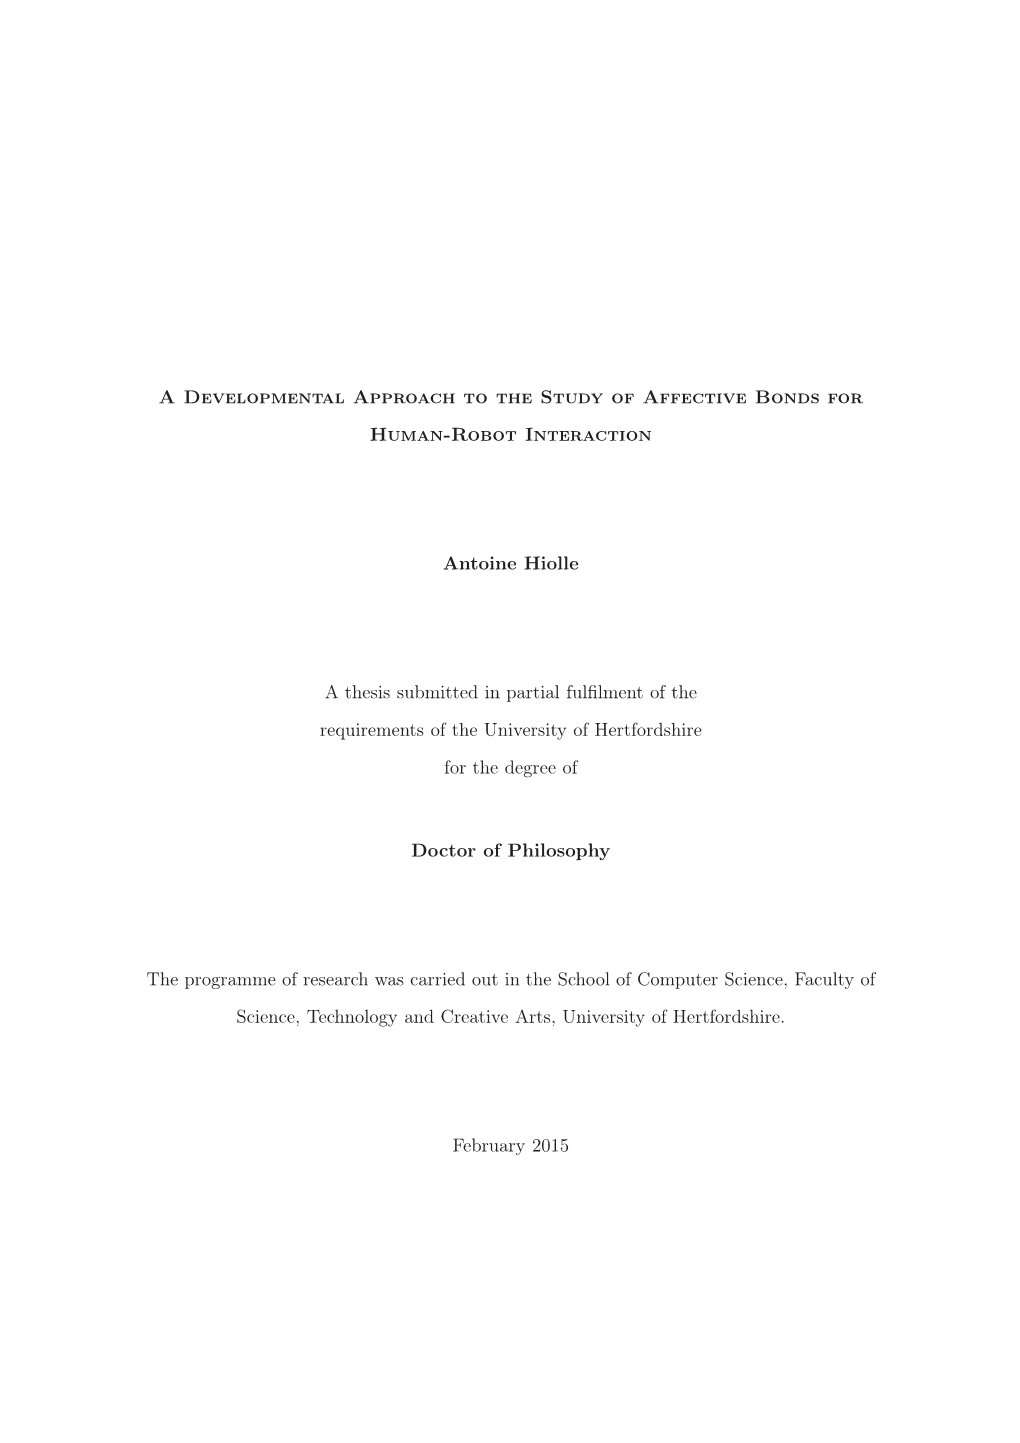 A Developmental Approach to the Study of Affective Bonds for Human-Robot Interaction Antoine Hiolle a Thesis Submitted in Partia